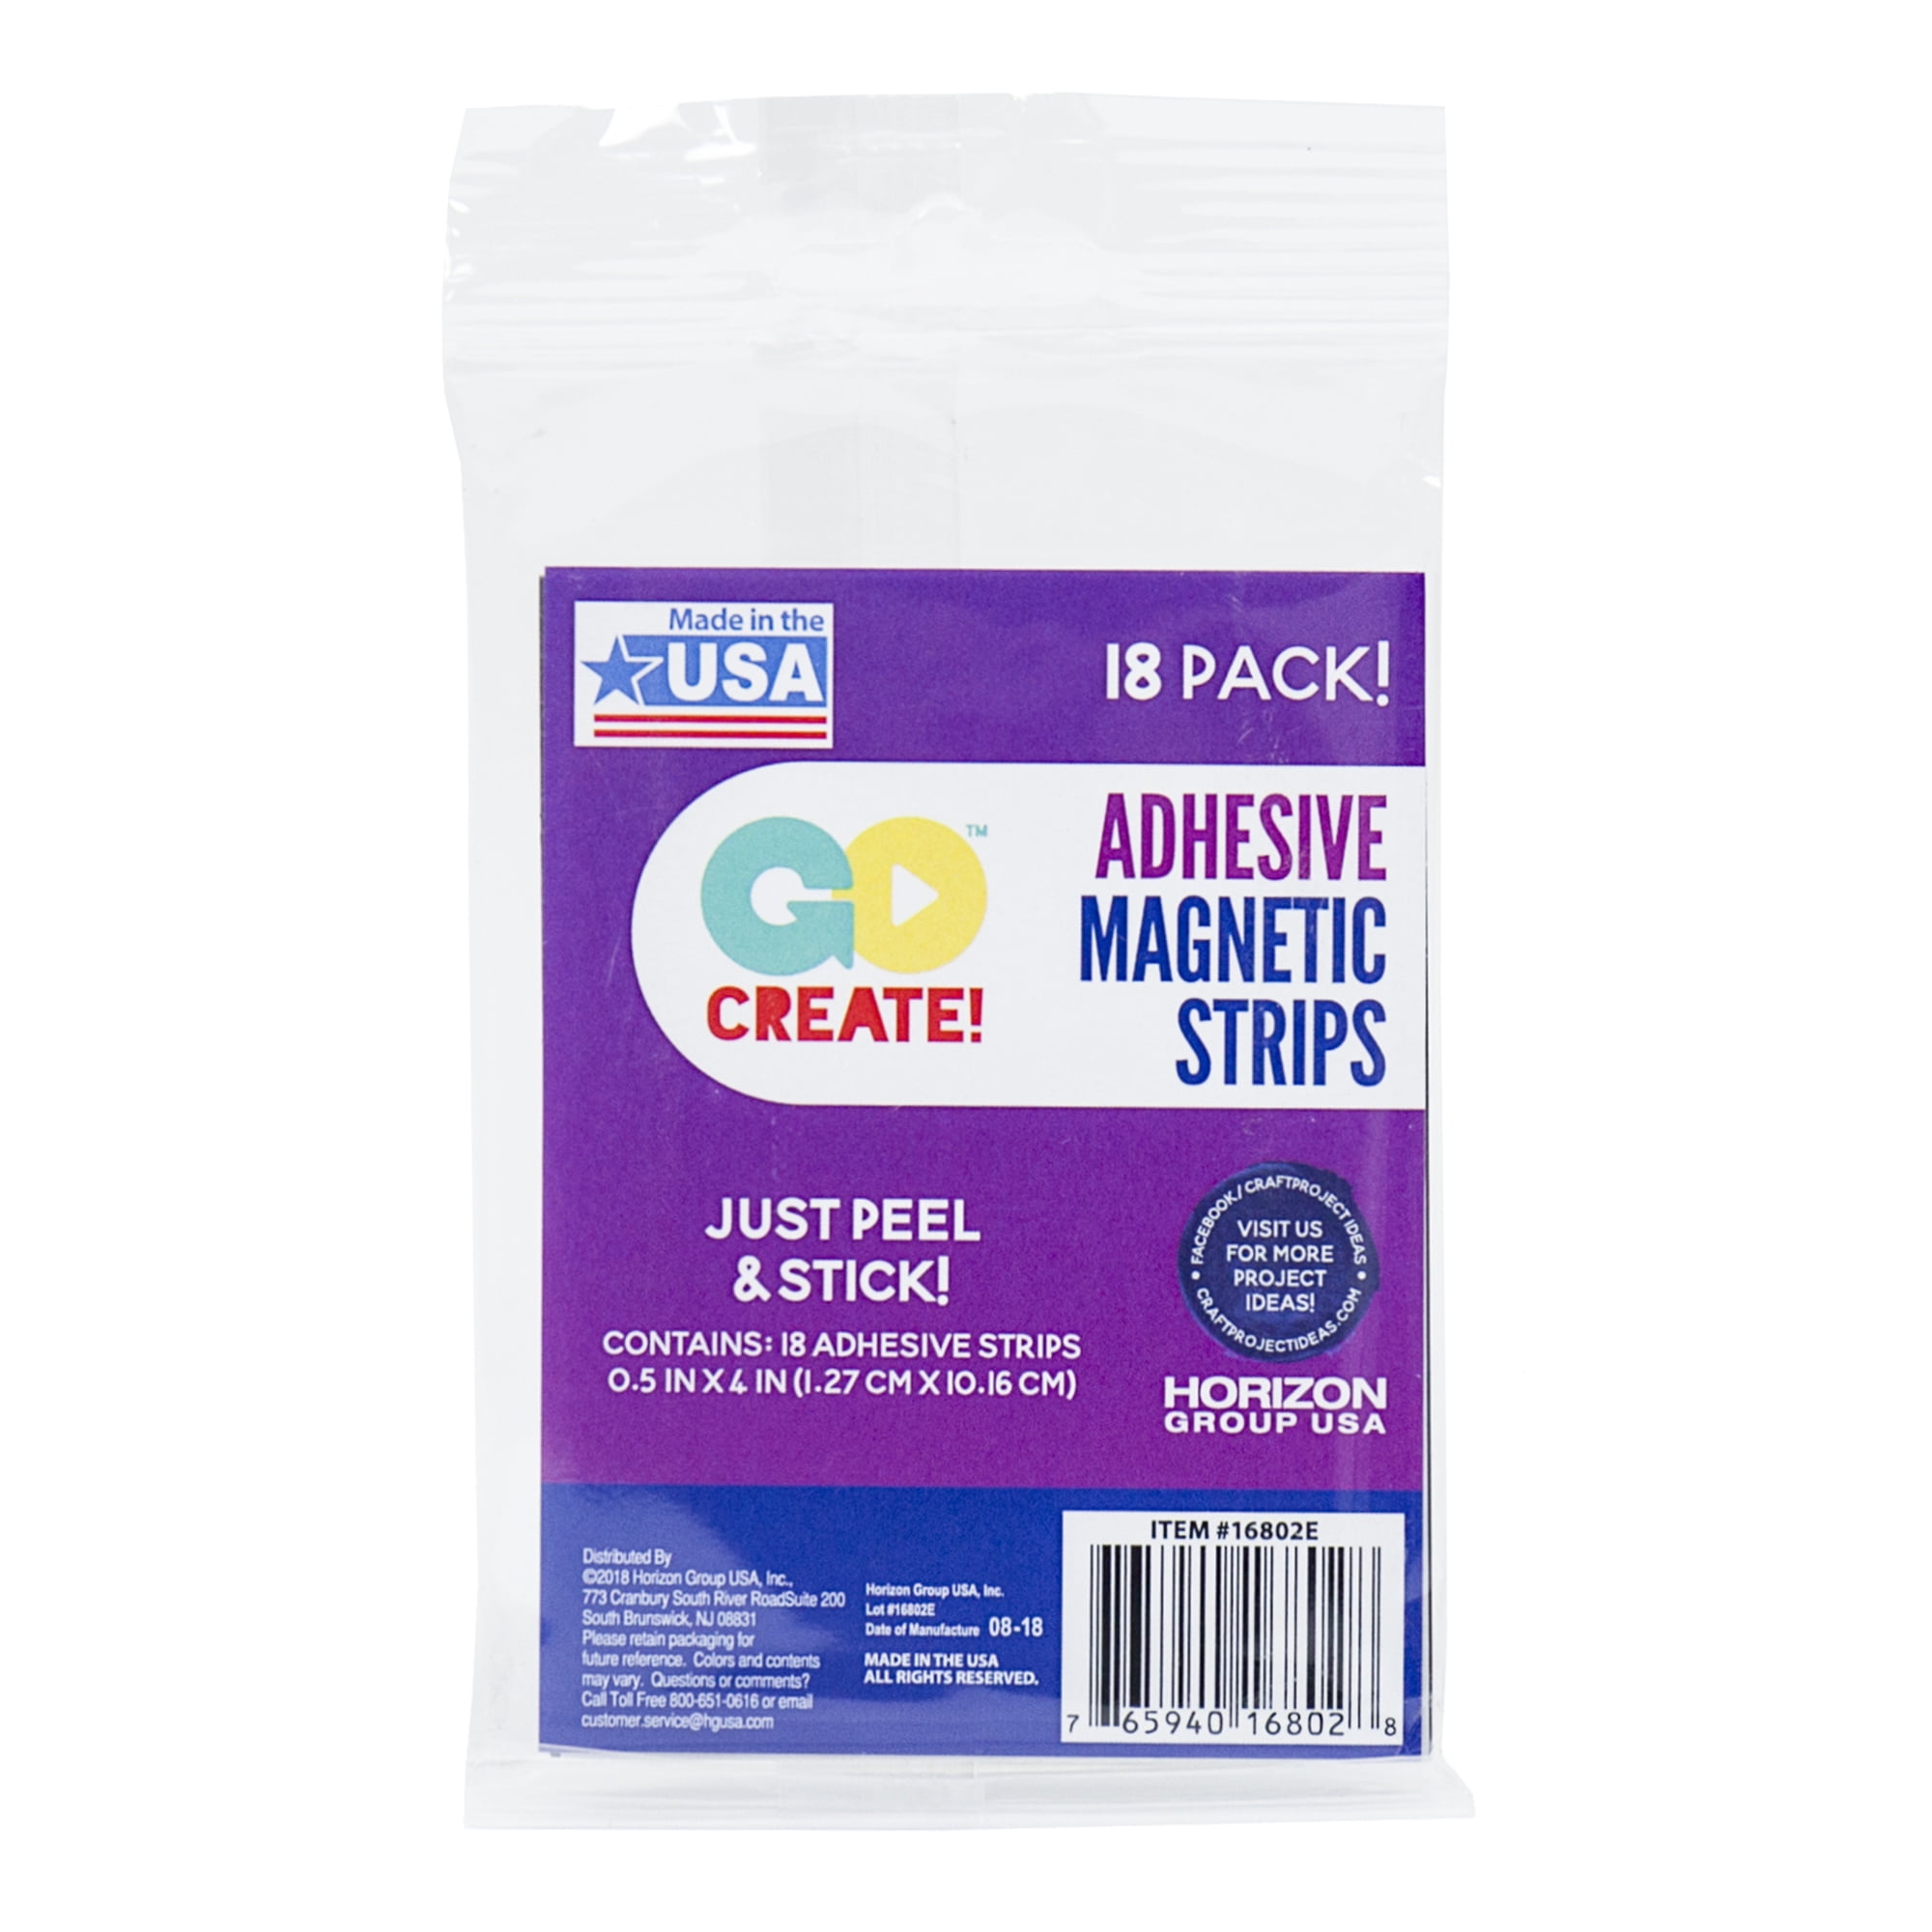 Go Create Peel & Stick Adhesive Magnetic Strips, 18 Count